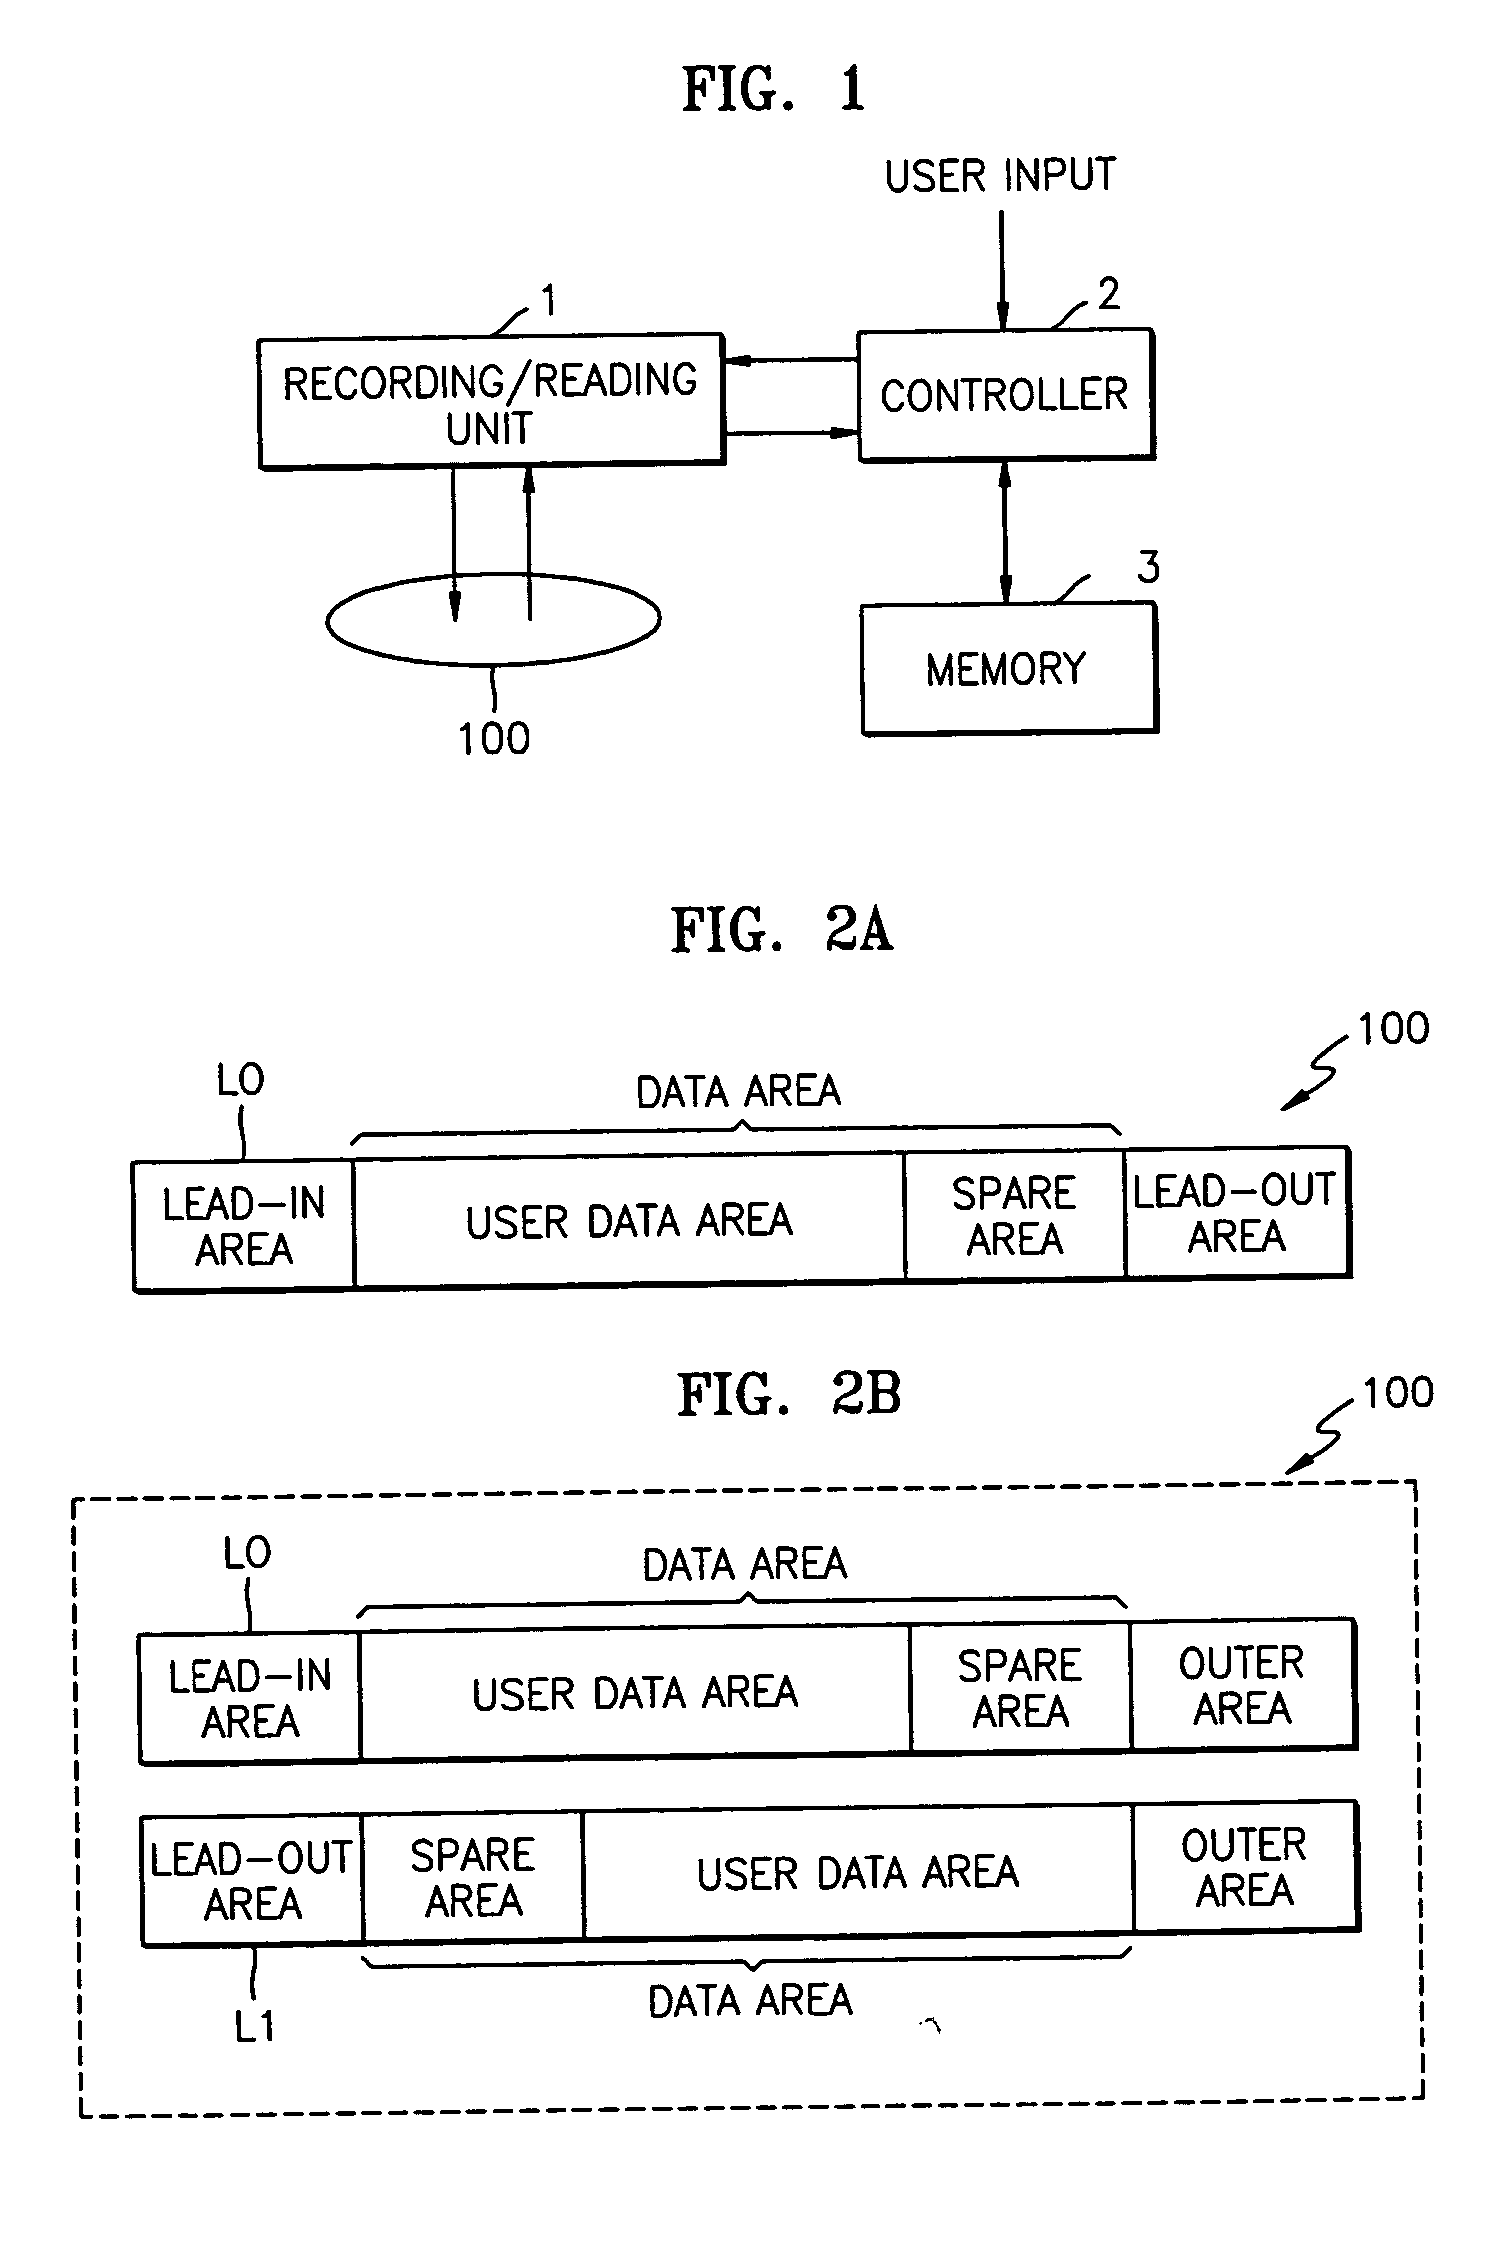 Method of and apparatus for managing disc defects using temporary defect management information (TDFL) and temporary defect management information (TDDS), and disc having the TDFL and TDDS